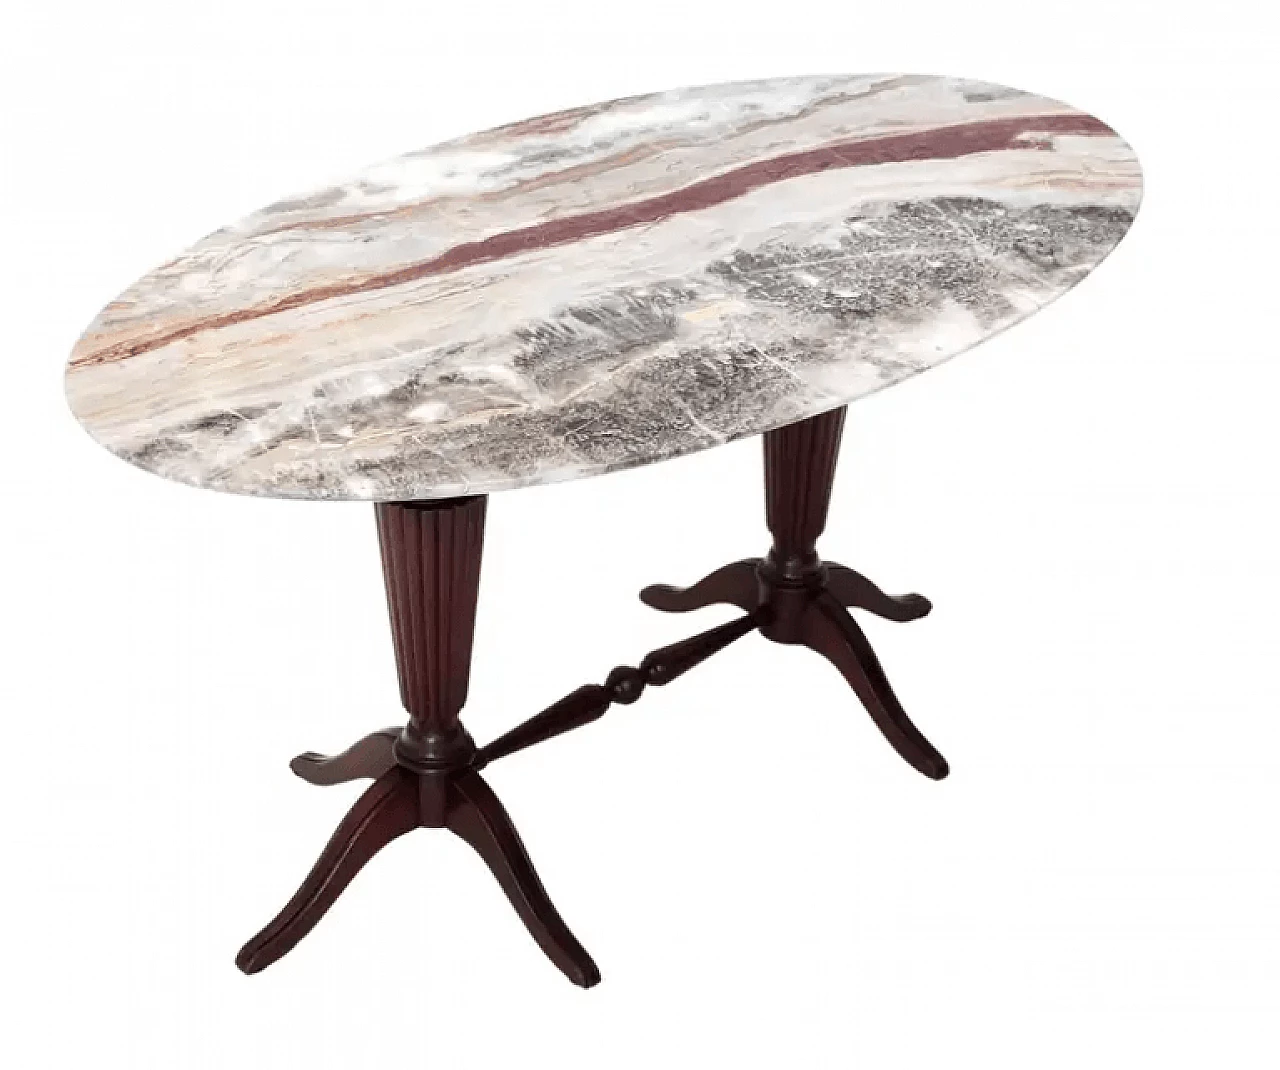 Beechwood coffee table with oval top in red onyx attributable to Paolo Buffa, 1950s 1